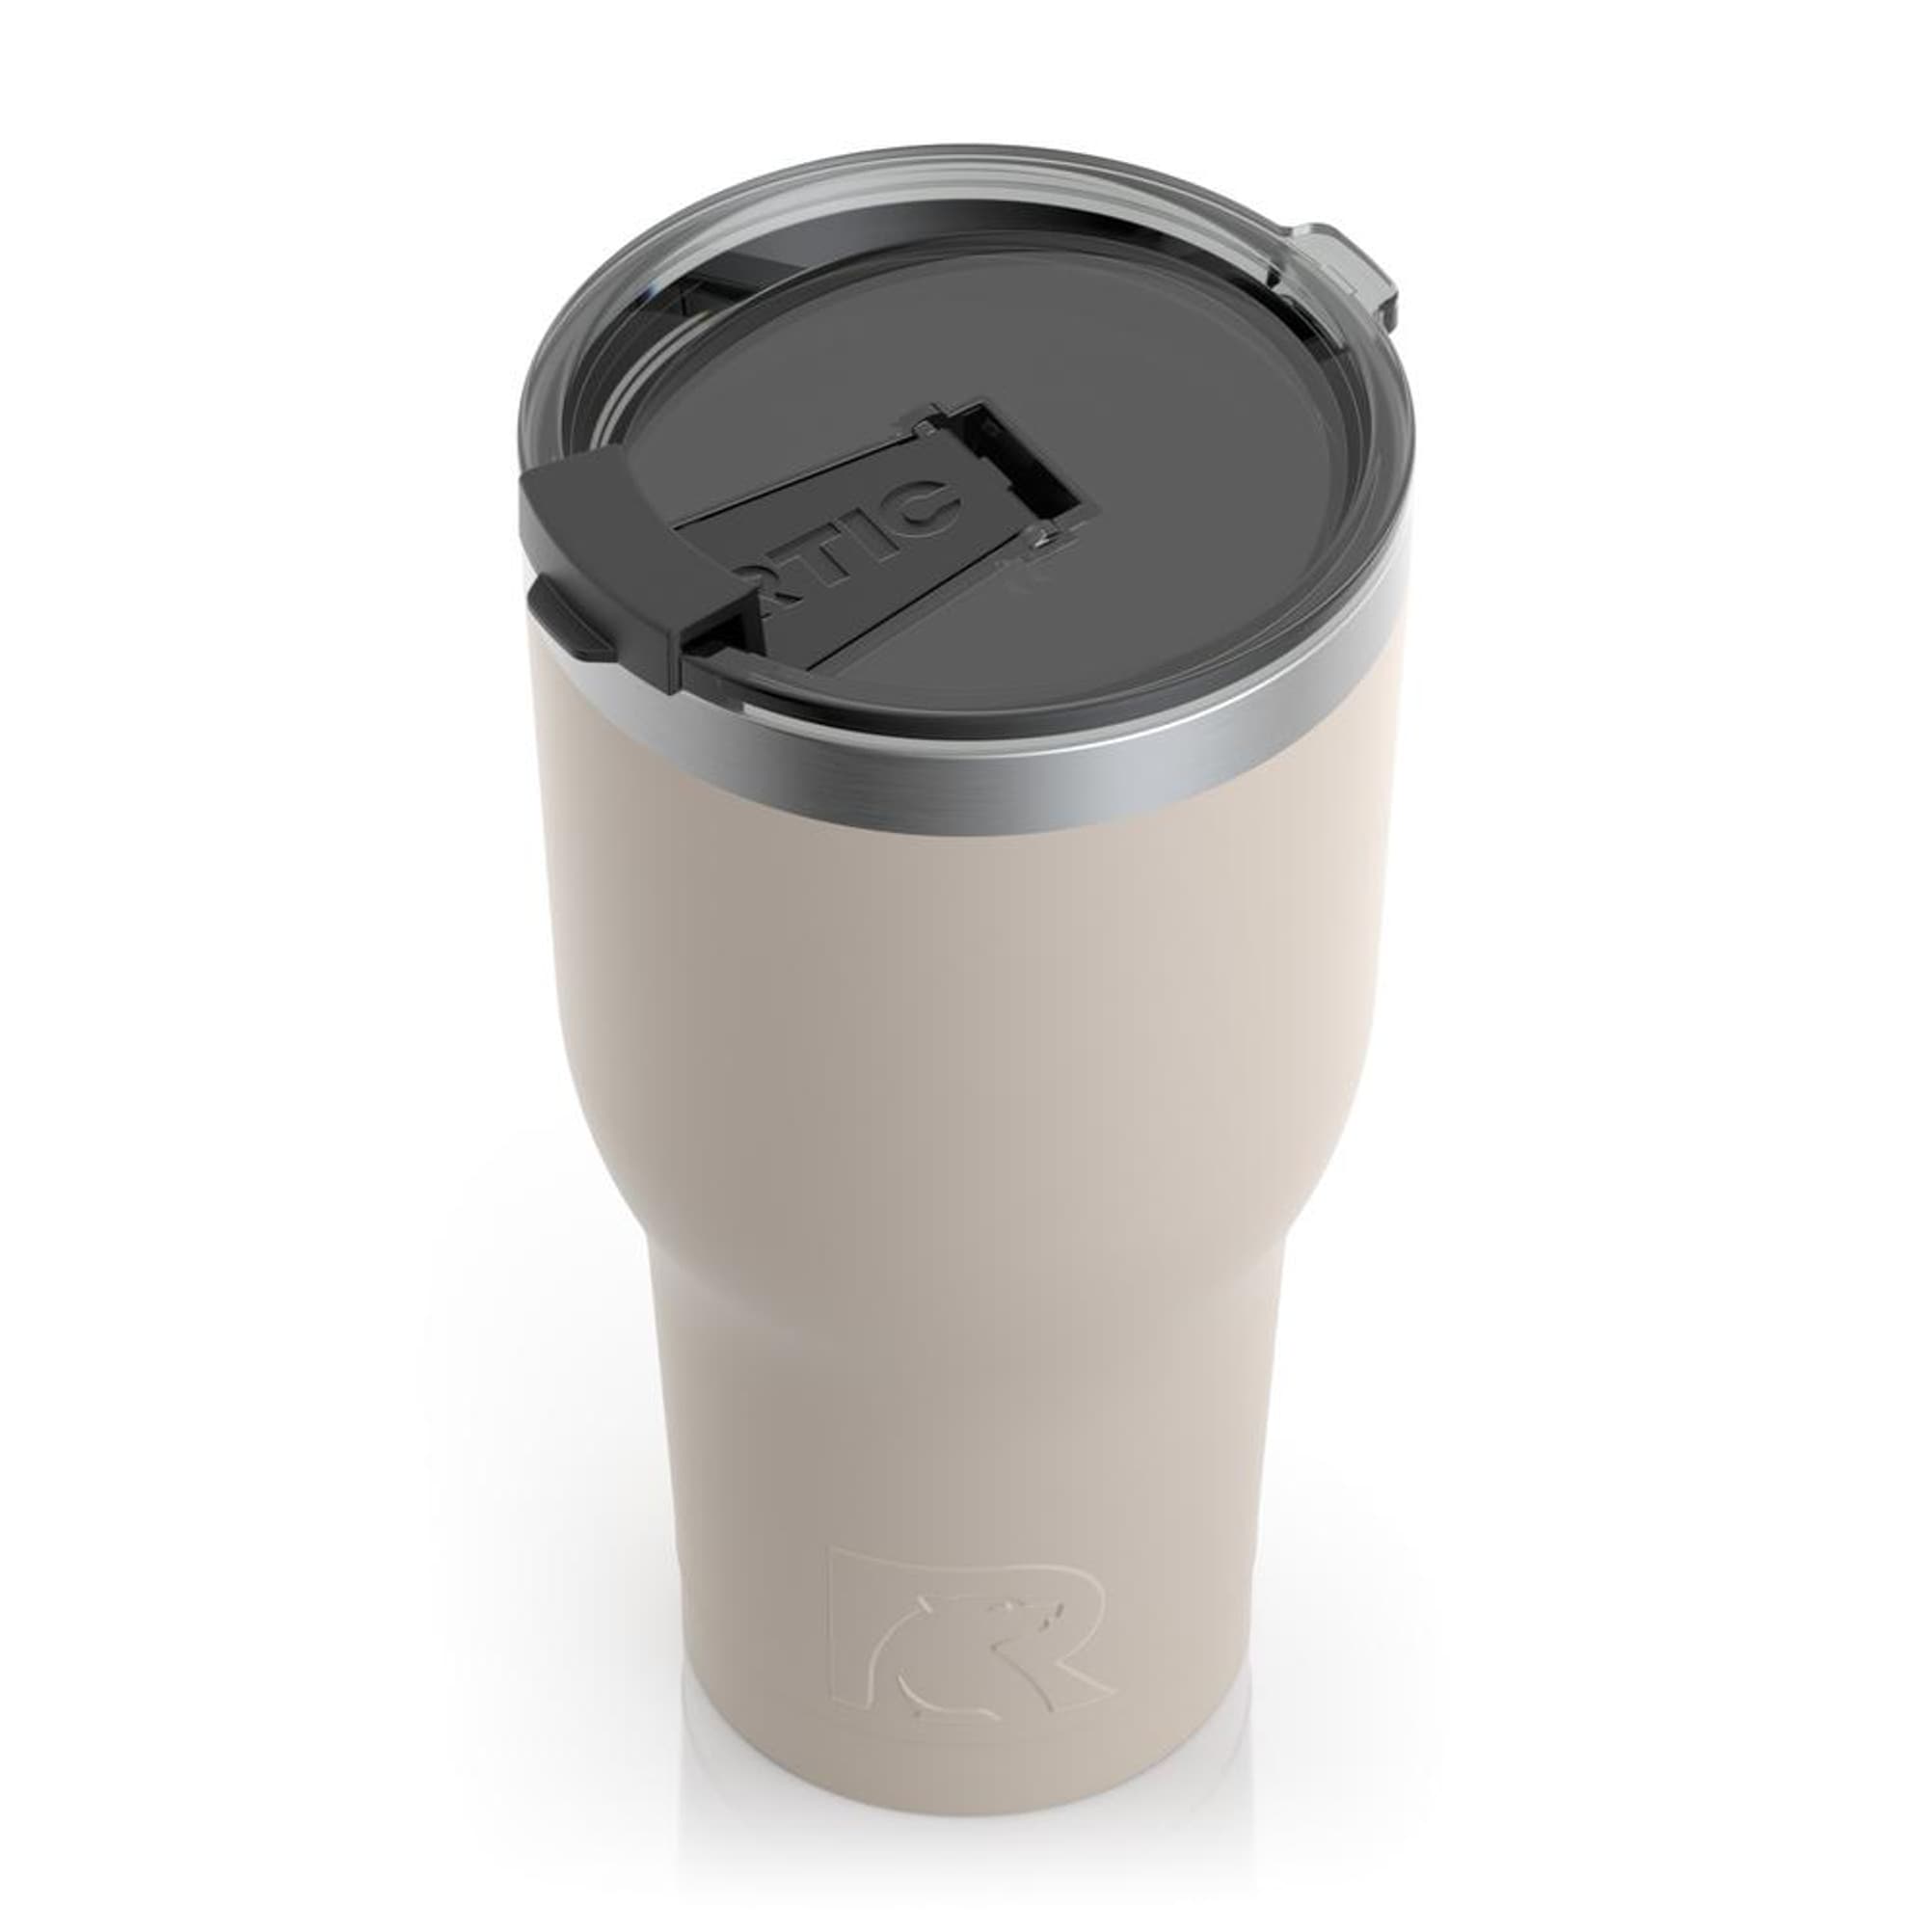 RTIC 16 oz Coffee Travel Mug with Lid and Handle, Stainless Steel Vacuum-Insulated  Mugs, Leak, Spill Proof, Hot Beverage and Cold, Portable Thermal Tumbler Cup  for Car, Camping, Deep Harbor 